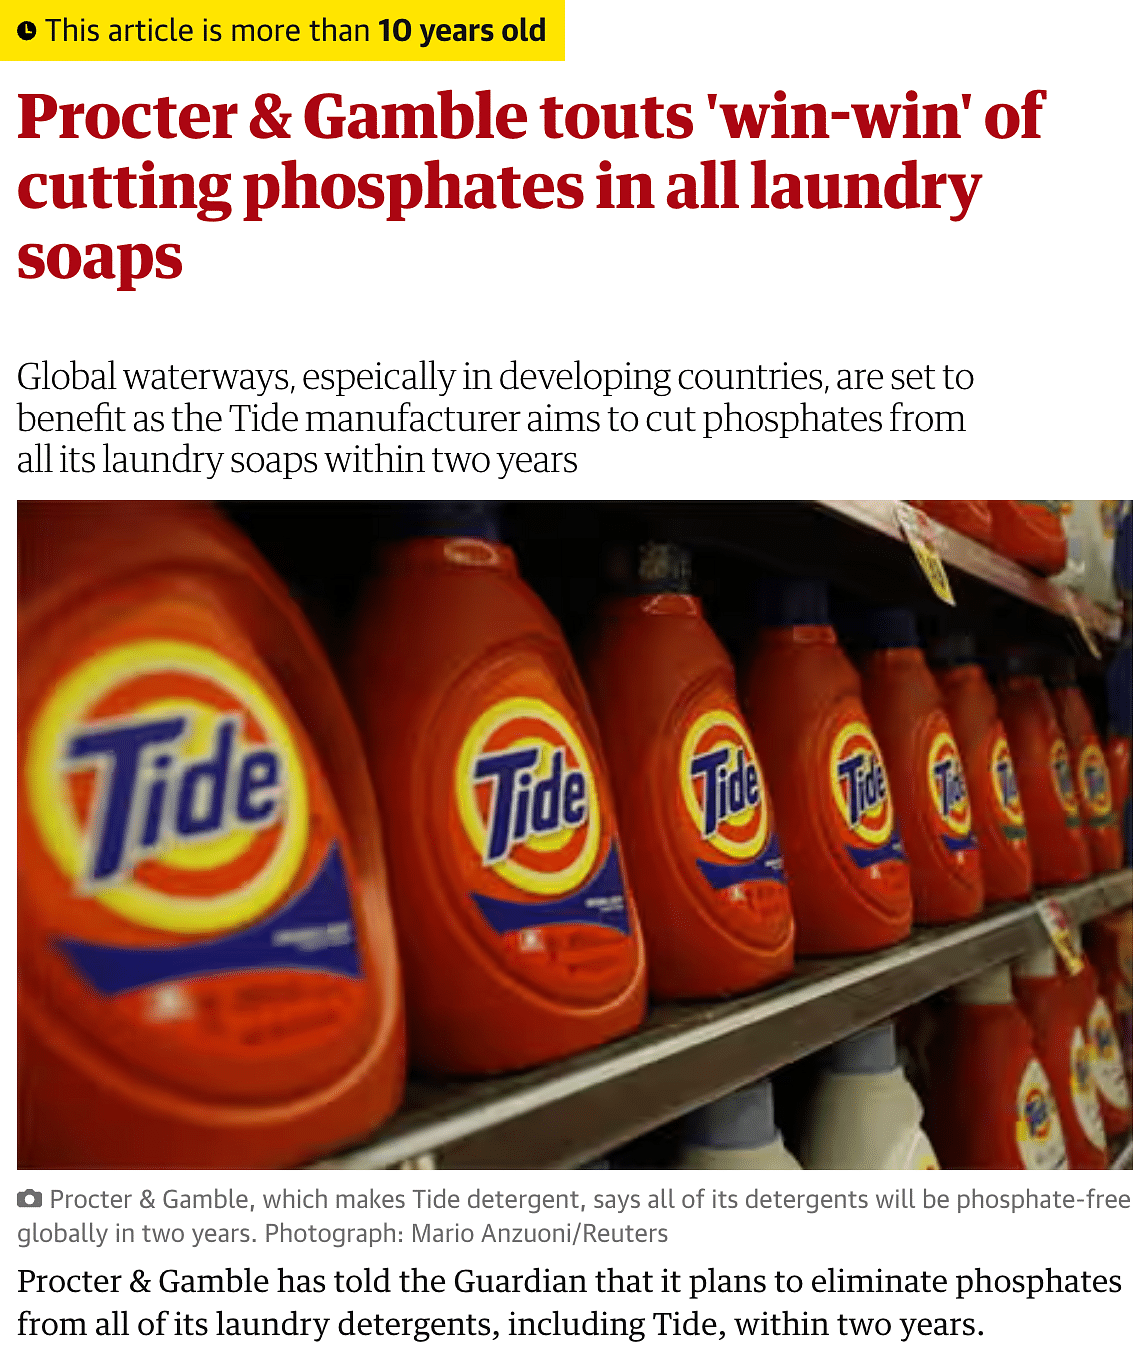 Tide has not been banned in Europe and 80 countries as claimed in the viral post.